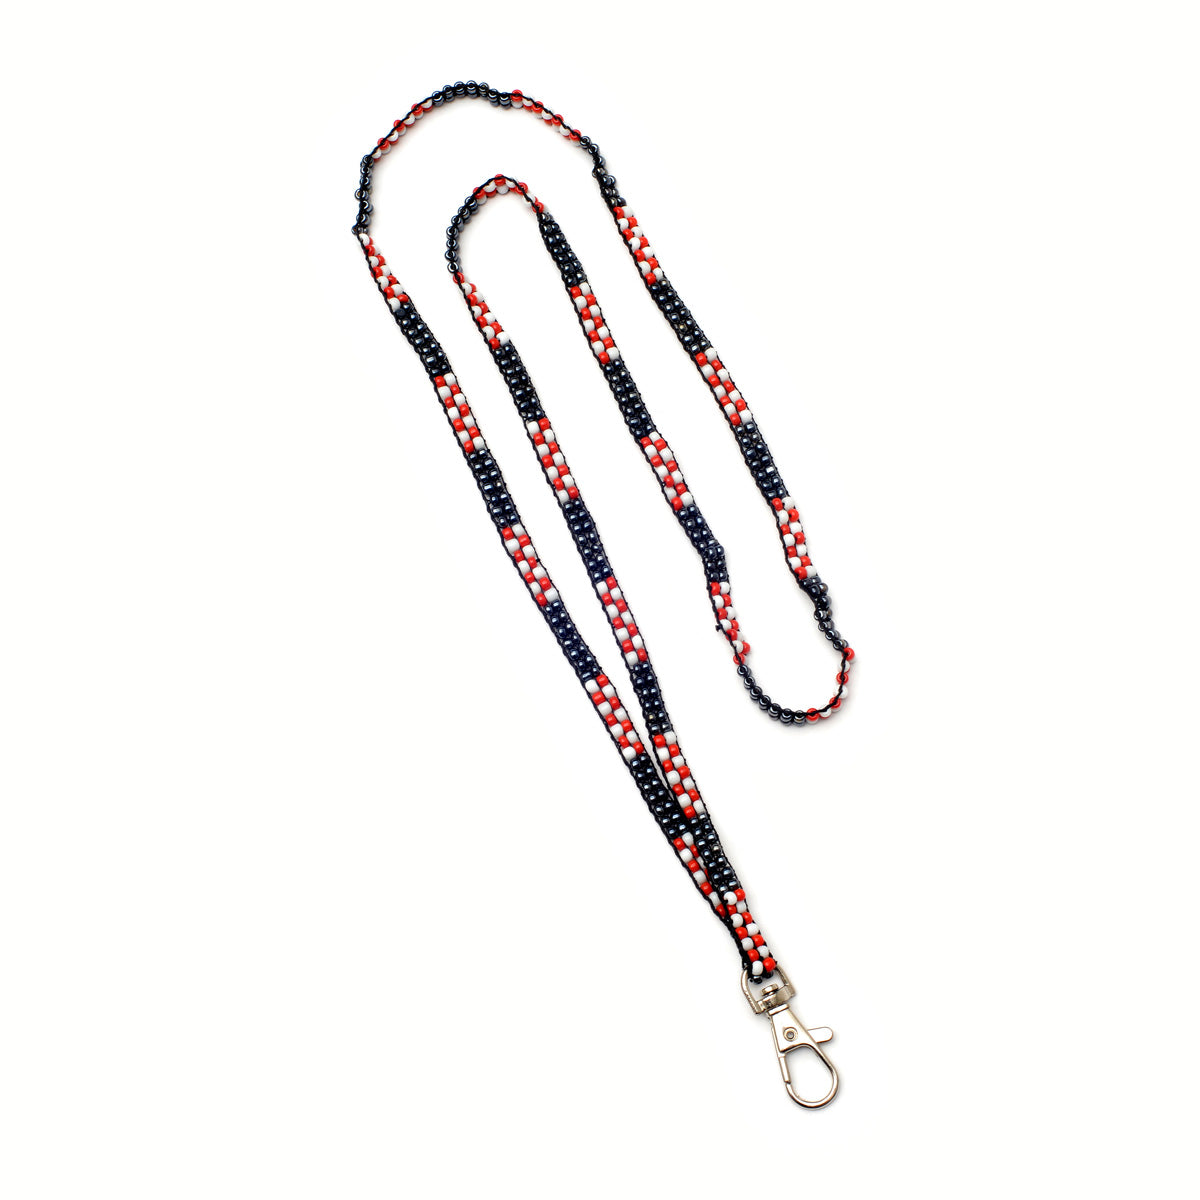 KidzPositive Beading Project Beaded Lanyard Loomed Two Bead Wide Red_Black_White Beaded Lanyard